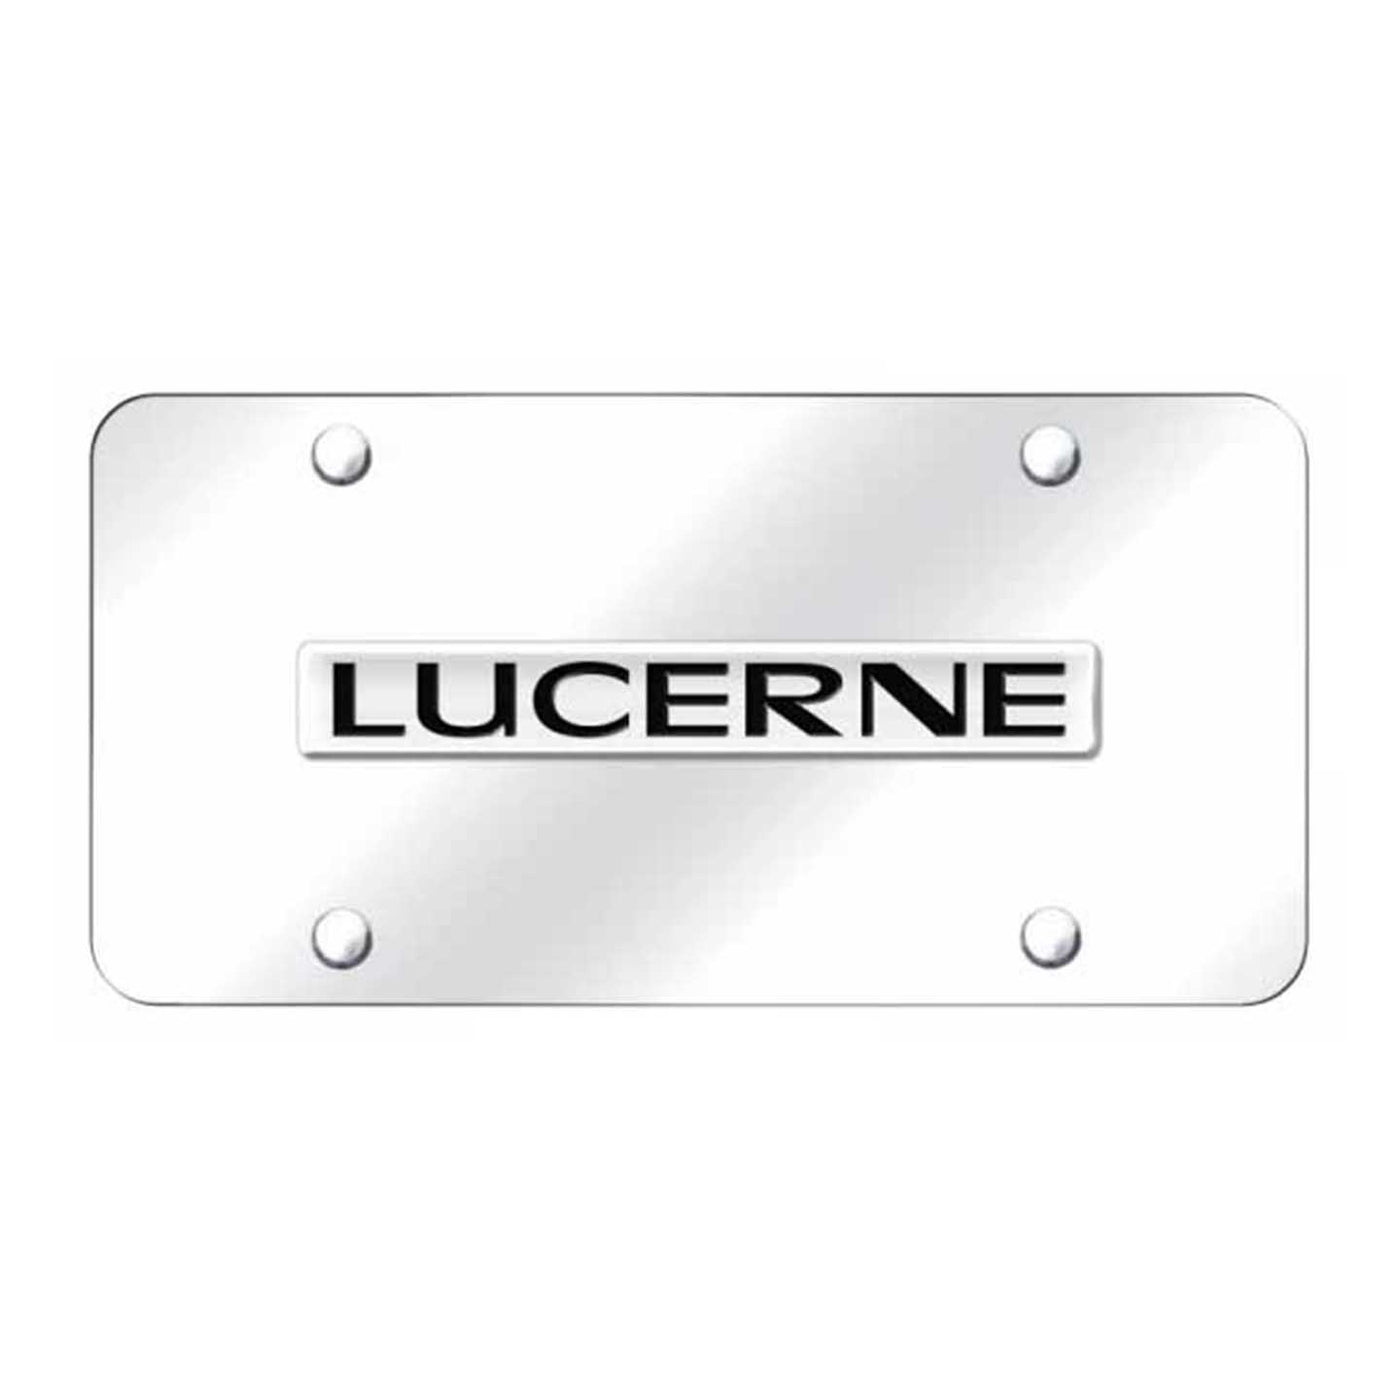 Lucerne Name License Plate - Chrome on Mirrored